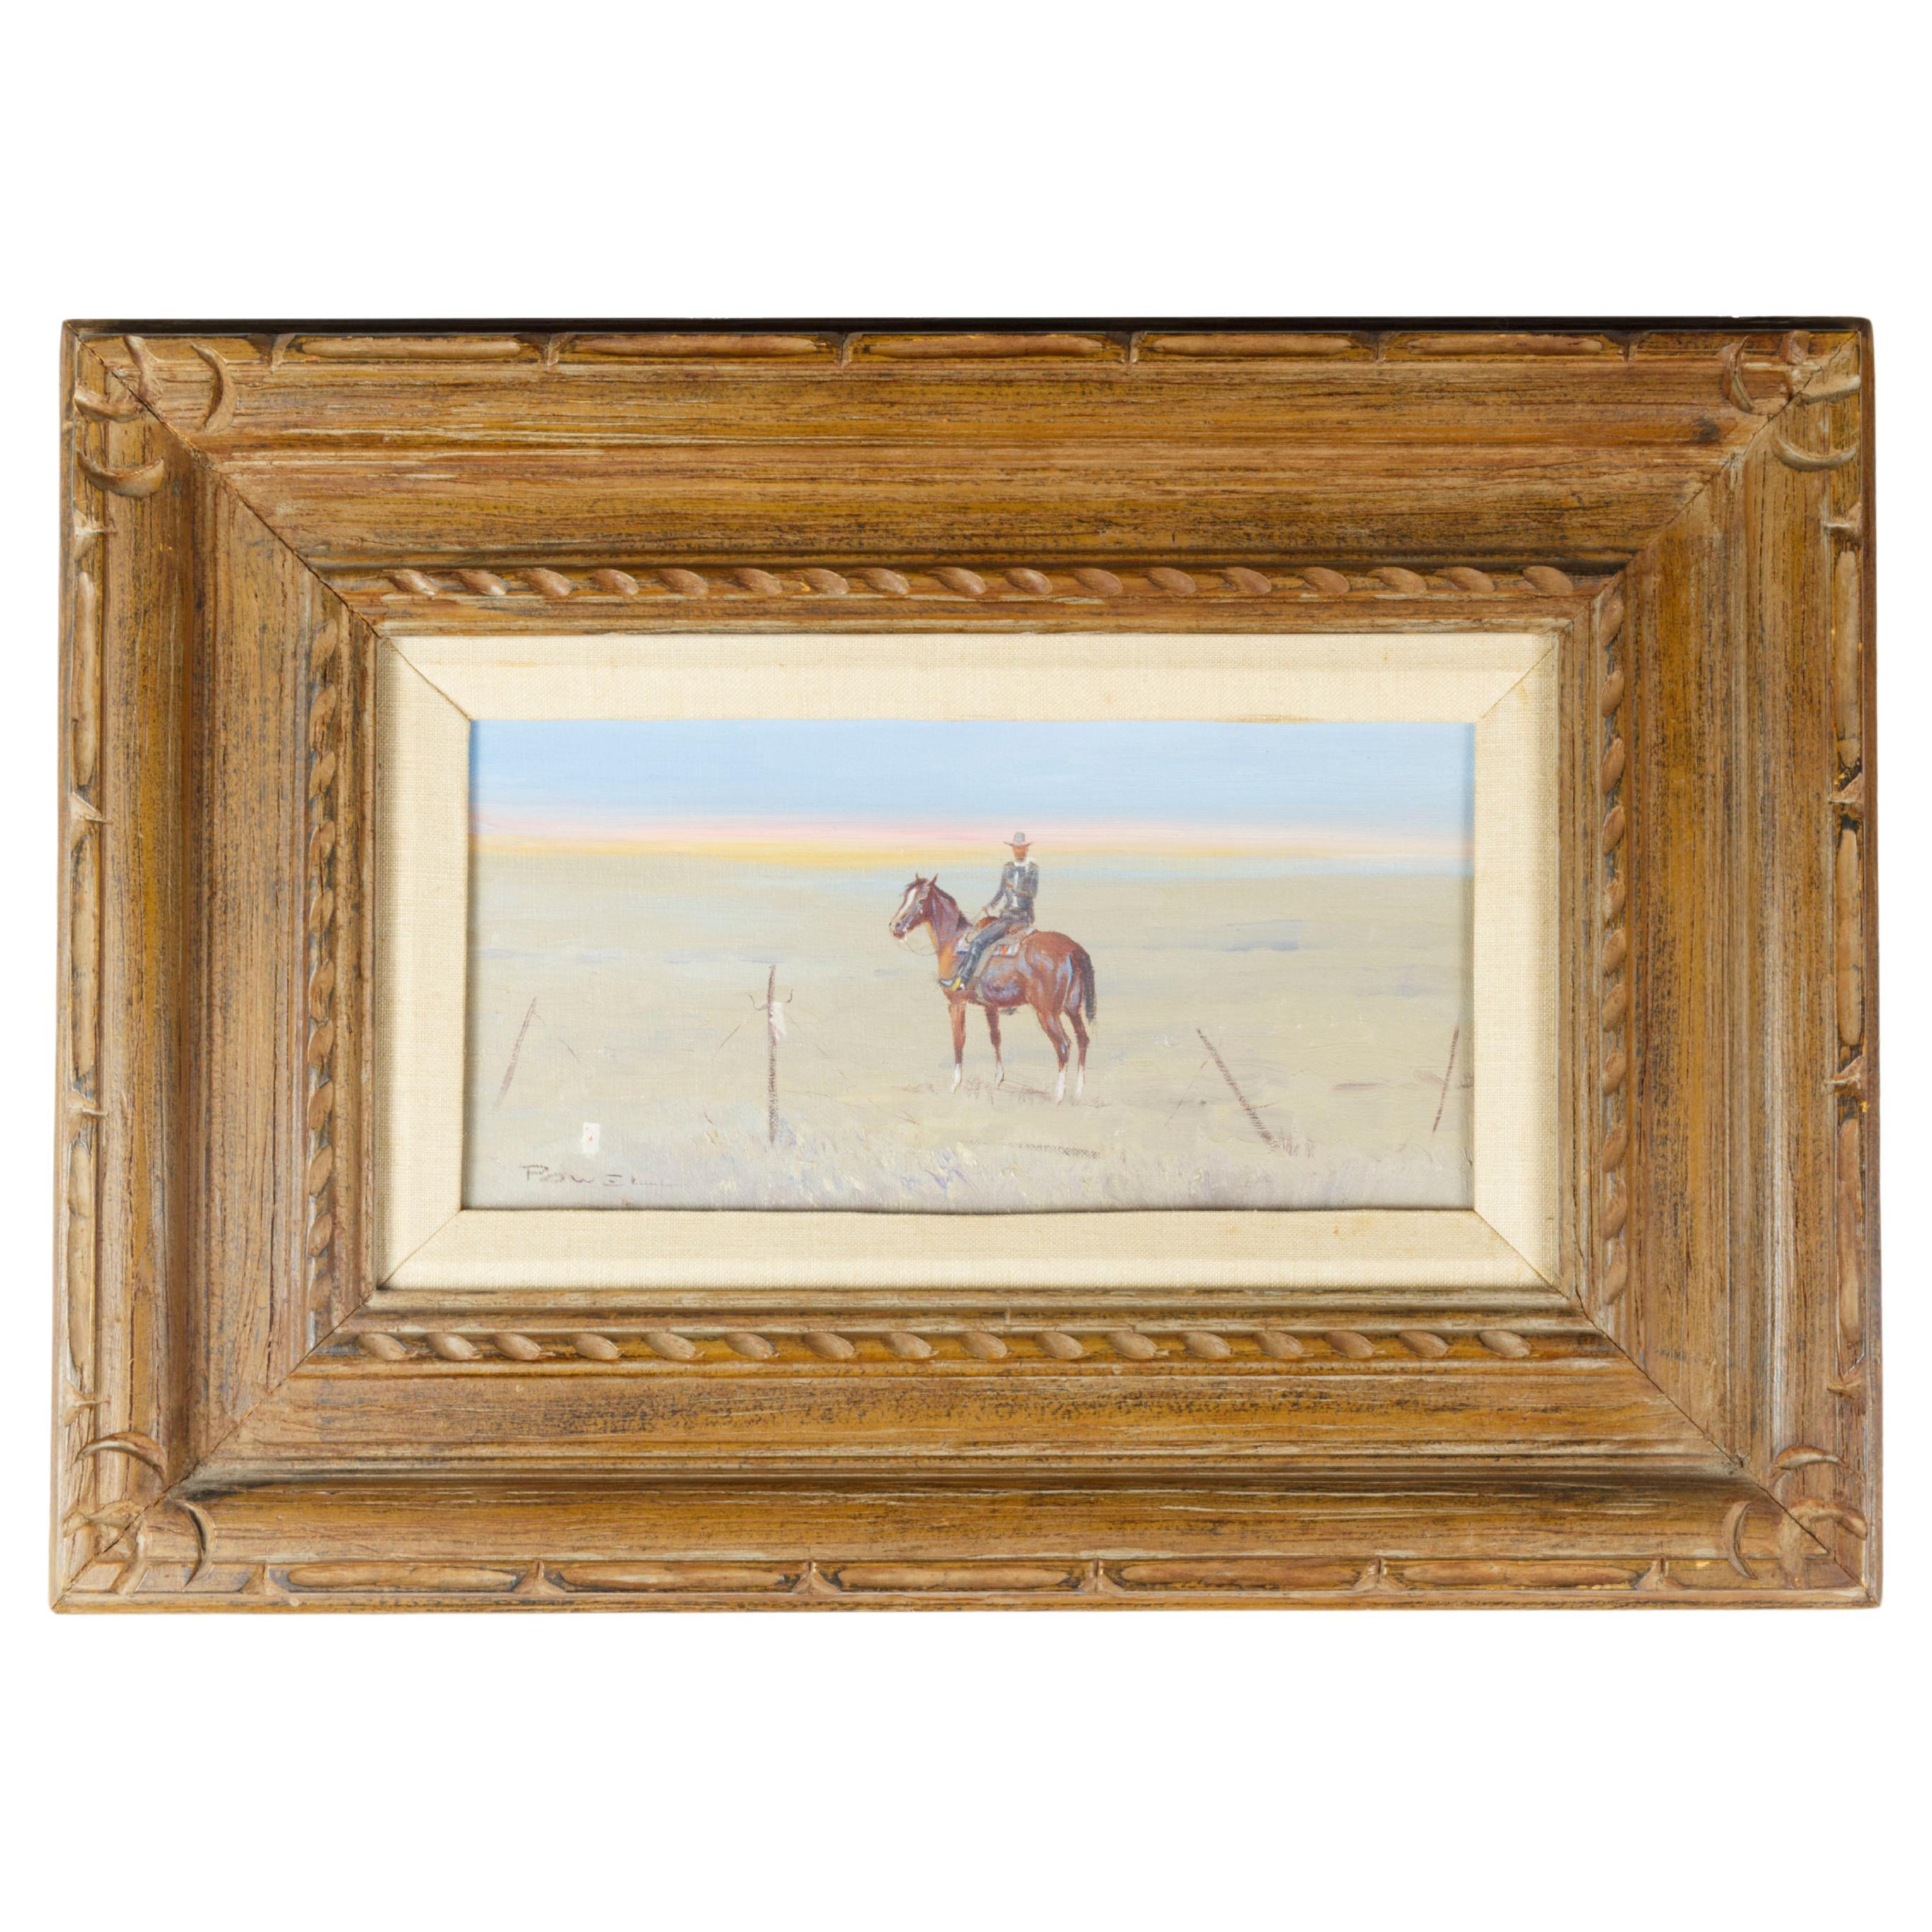 "Cowboy on the Plains" Original Oil Painting by Ace Powell